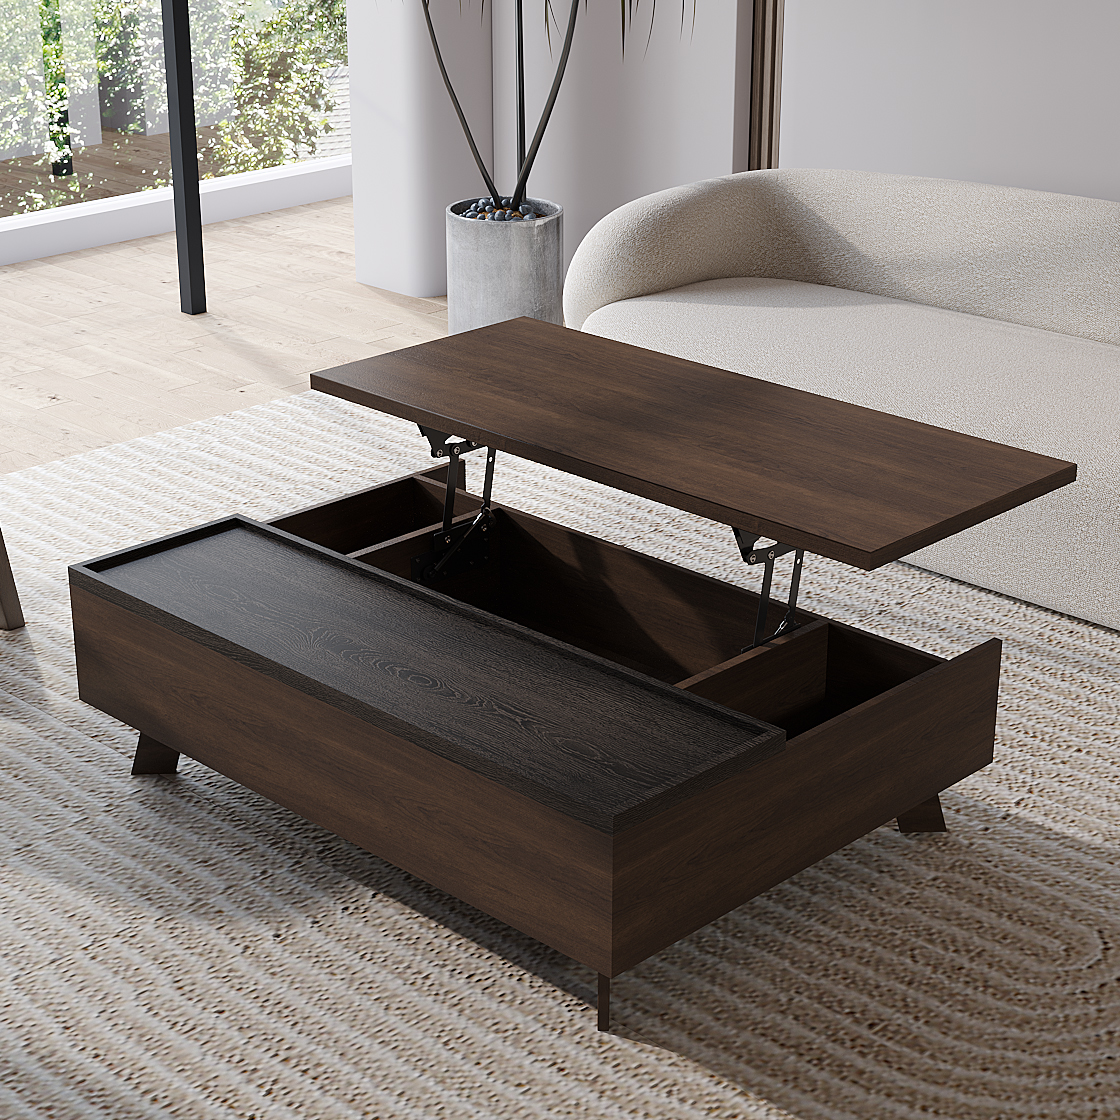 47.2" Convertible Storage Coffee Table